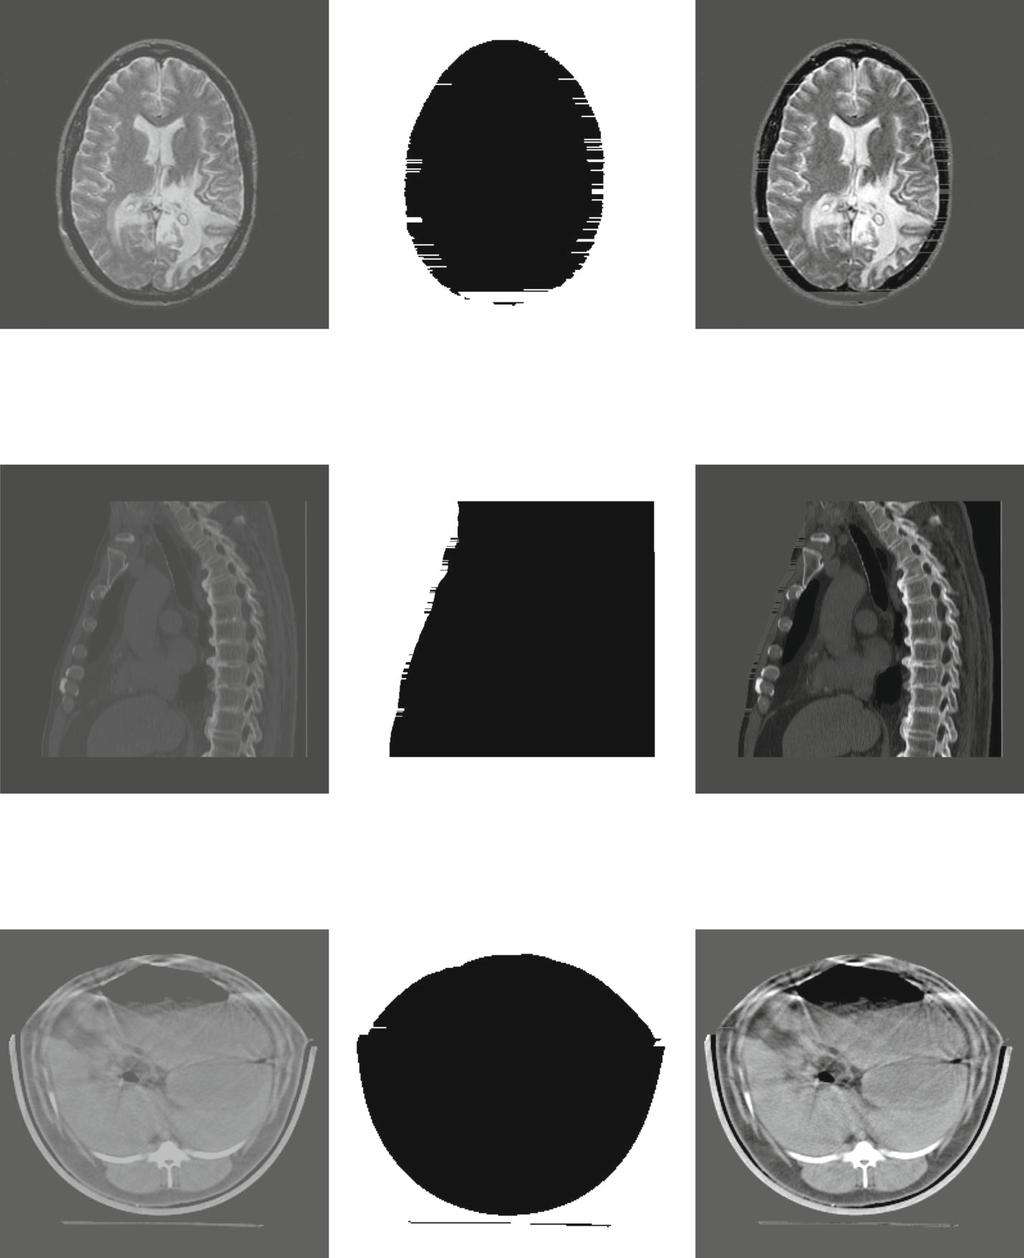 Fig. 7 Embedded only into ROI region of three cover medical images, in which (a,d,g) are original images, (b,e,h) areroi region of three cover images, (c,f,i) are marked-images when embedded maximum